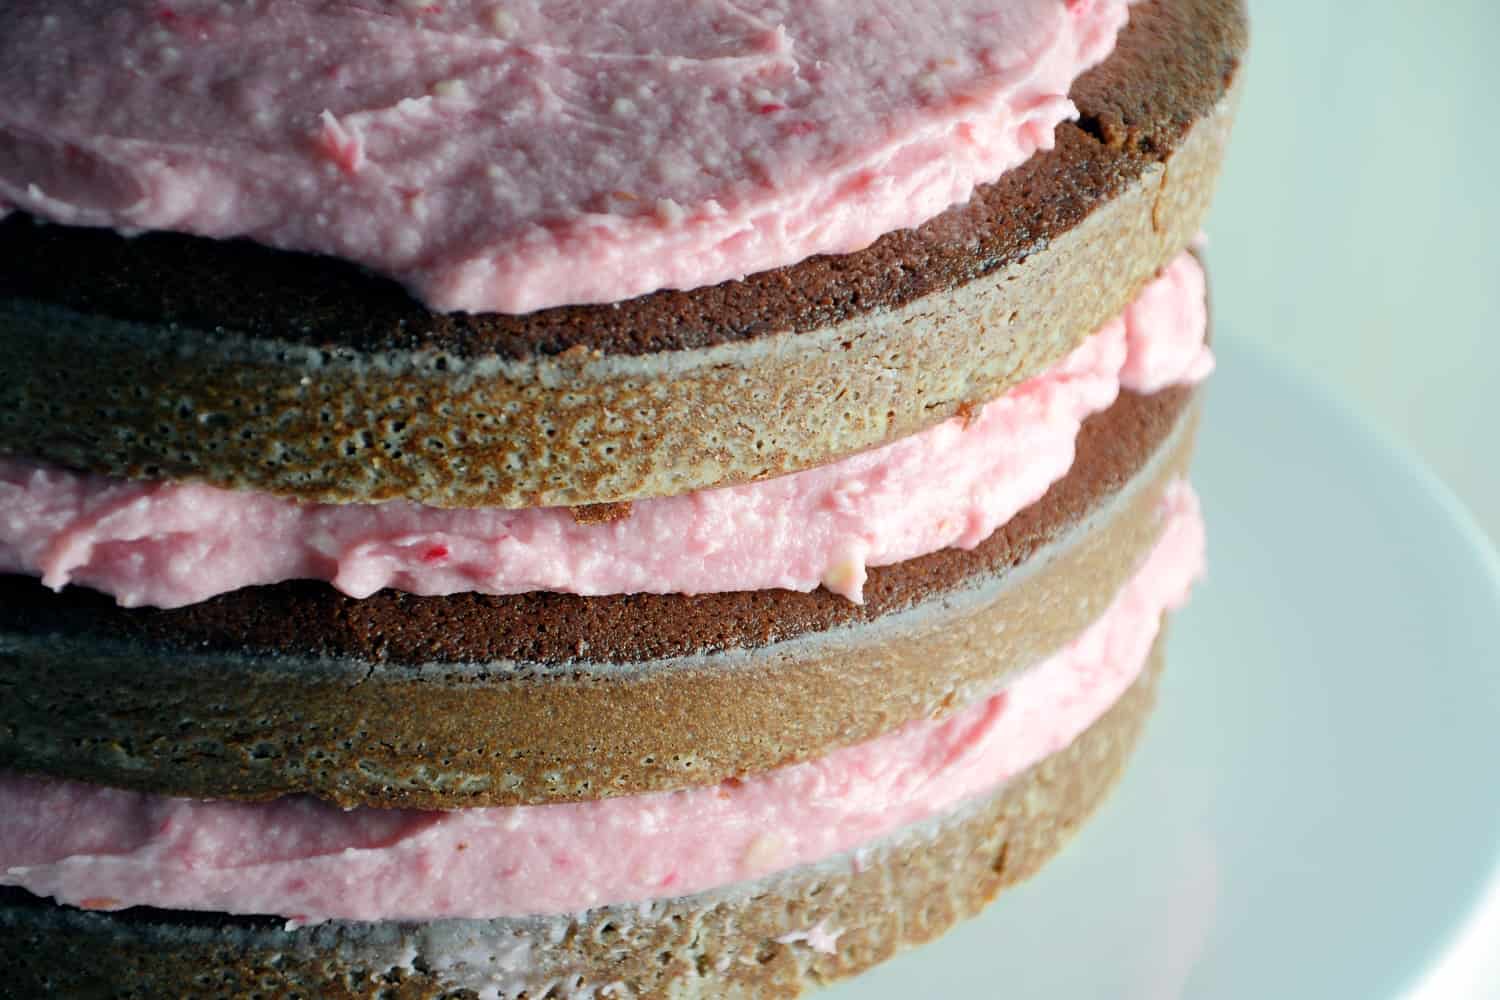 Chocolate Cake with Raspberry Buttercream- "naked cakes" are all the rage and so simple! Moist, rich, and delicious dark chocolate cake that's perfect for Valentine's Day!